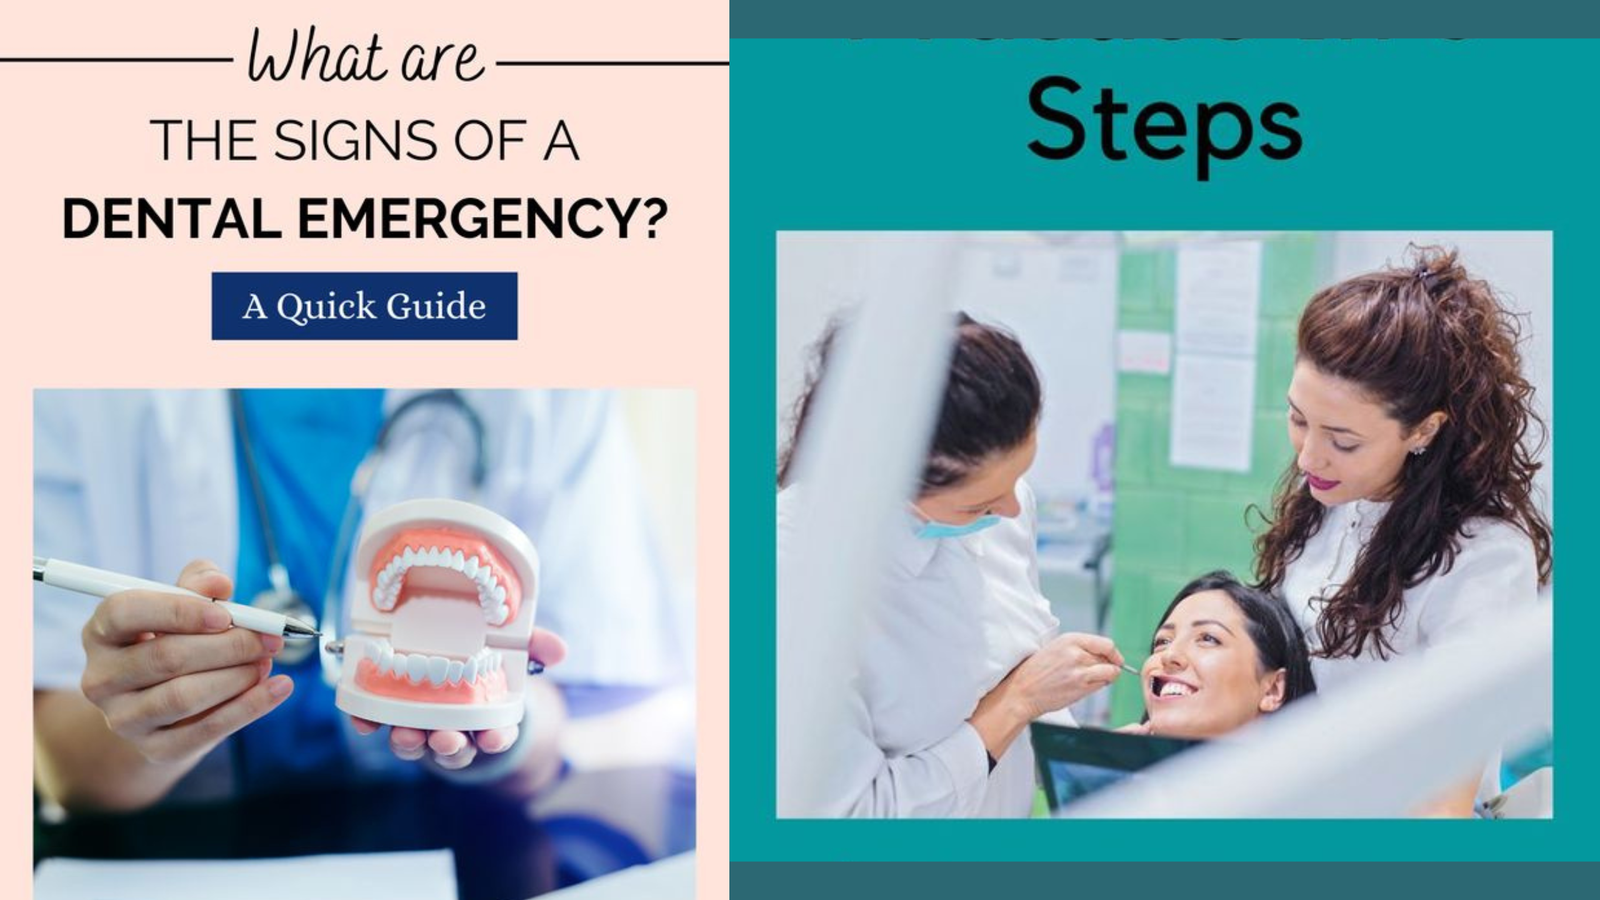 How to Get Emergency Dental Care Without Insurance?